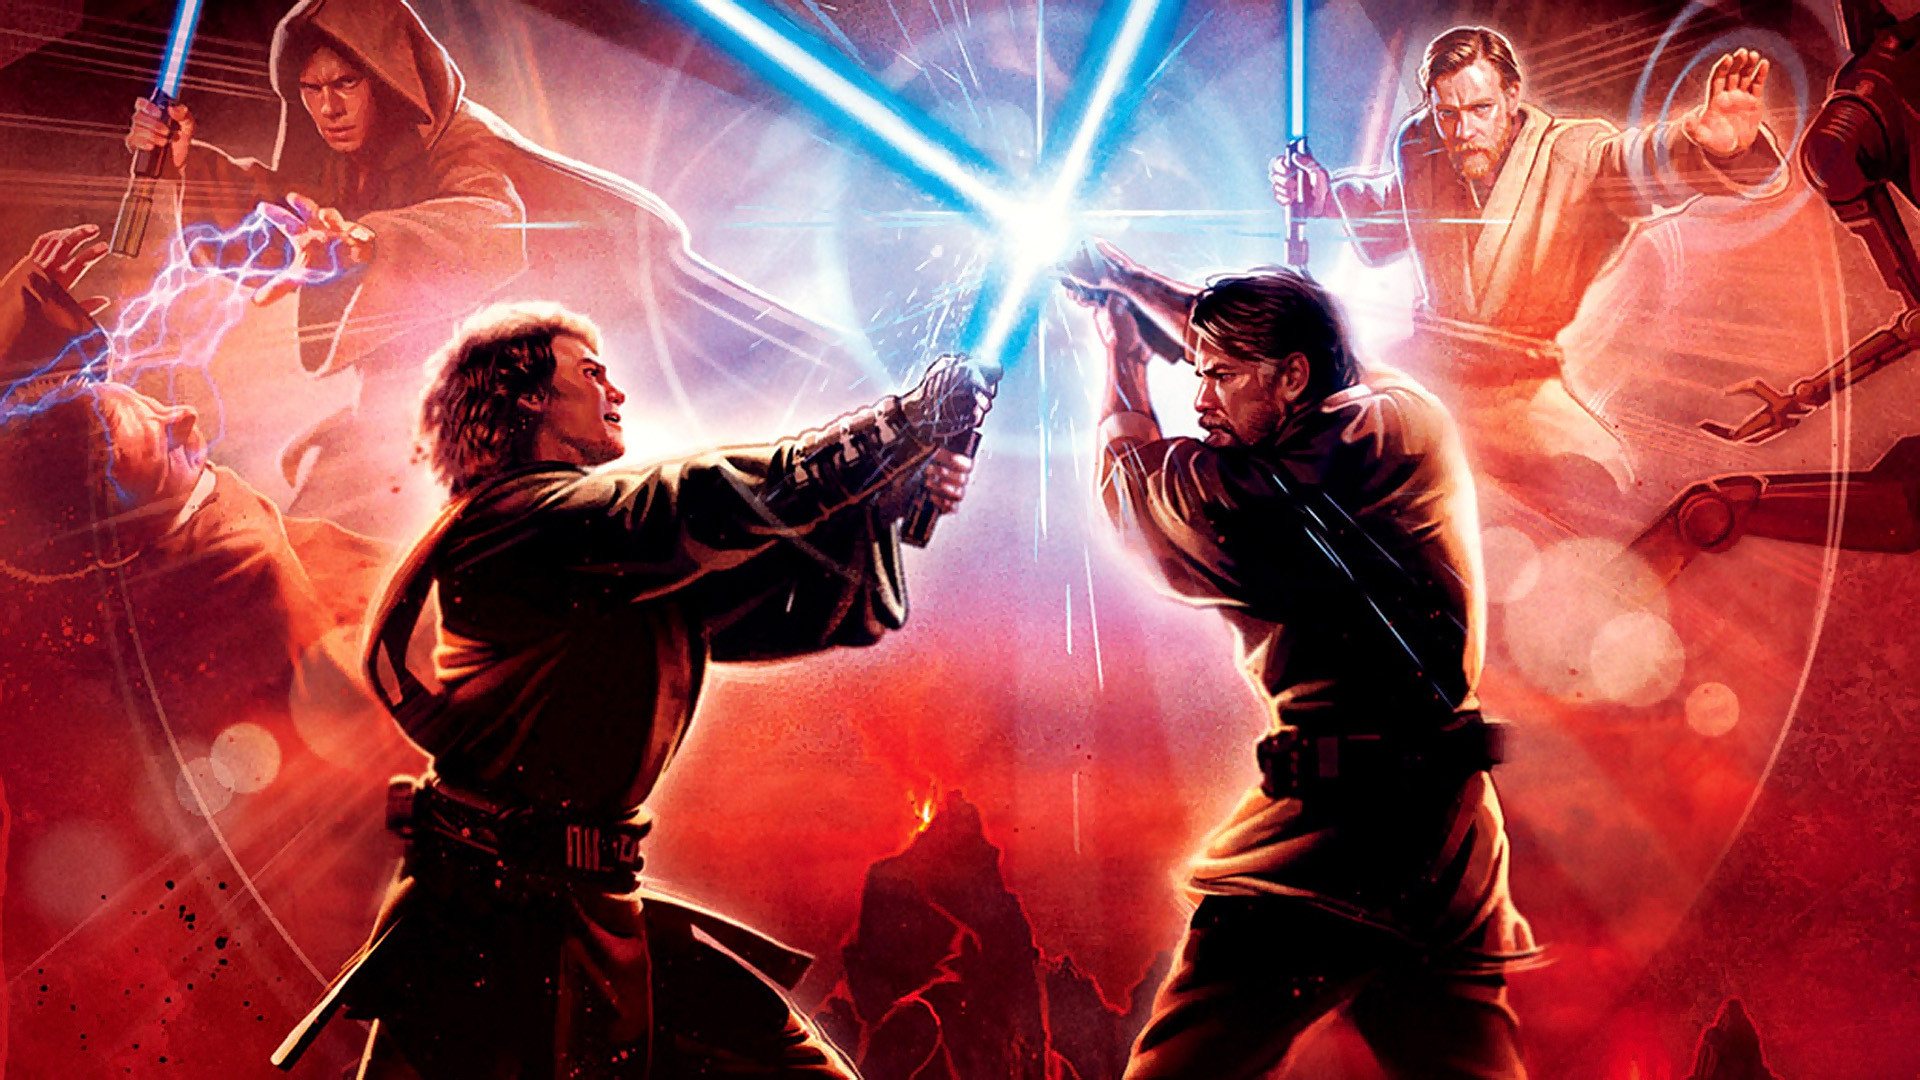 Movie Star Wars Episode Iii Revenge Of The Sith 1920x1080